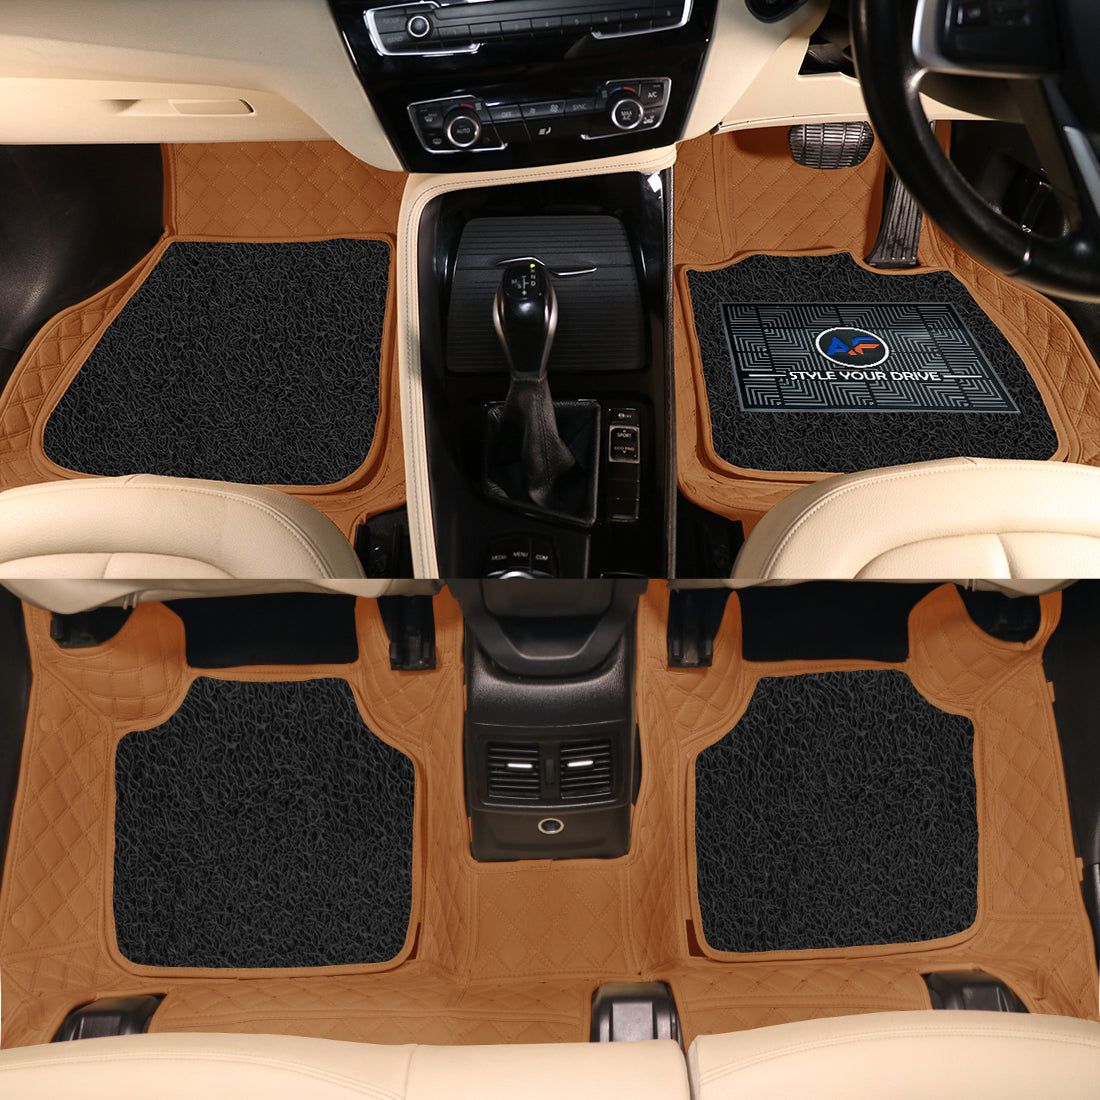 Porsche Macan 2019 7D Luxury Car Mat, All Weather Proof, Anti-Skid, 100% Waterproof & Odorless with Unique Diamond Fish Design (24mm Luxury PU Leather, 2 Rows)